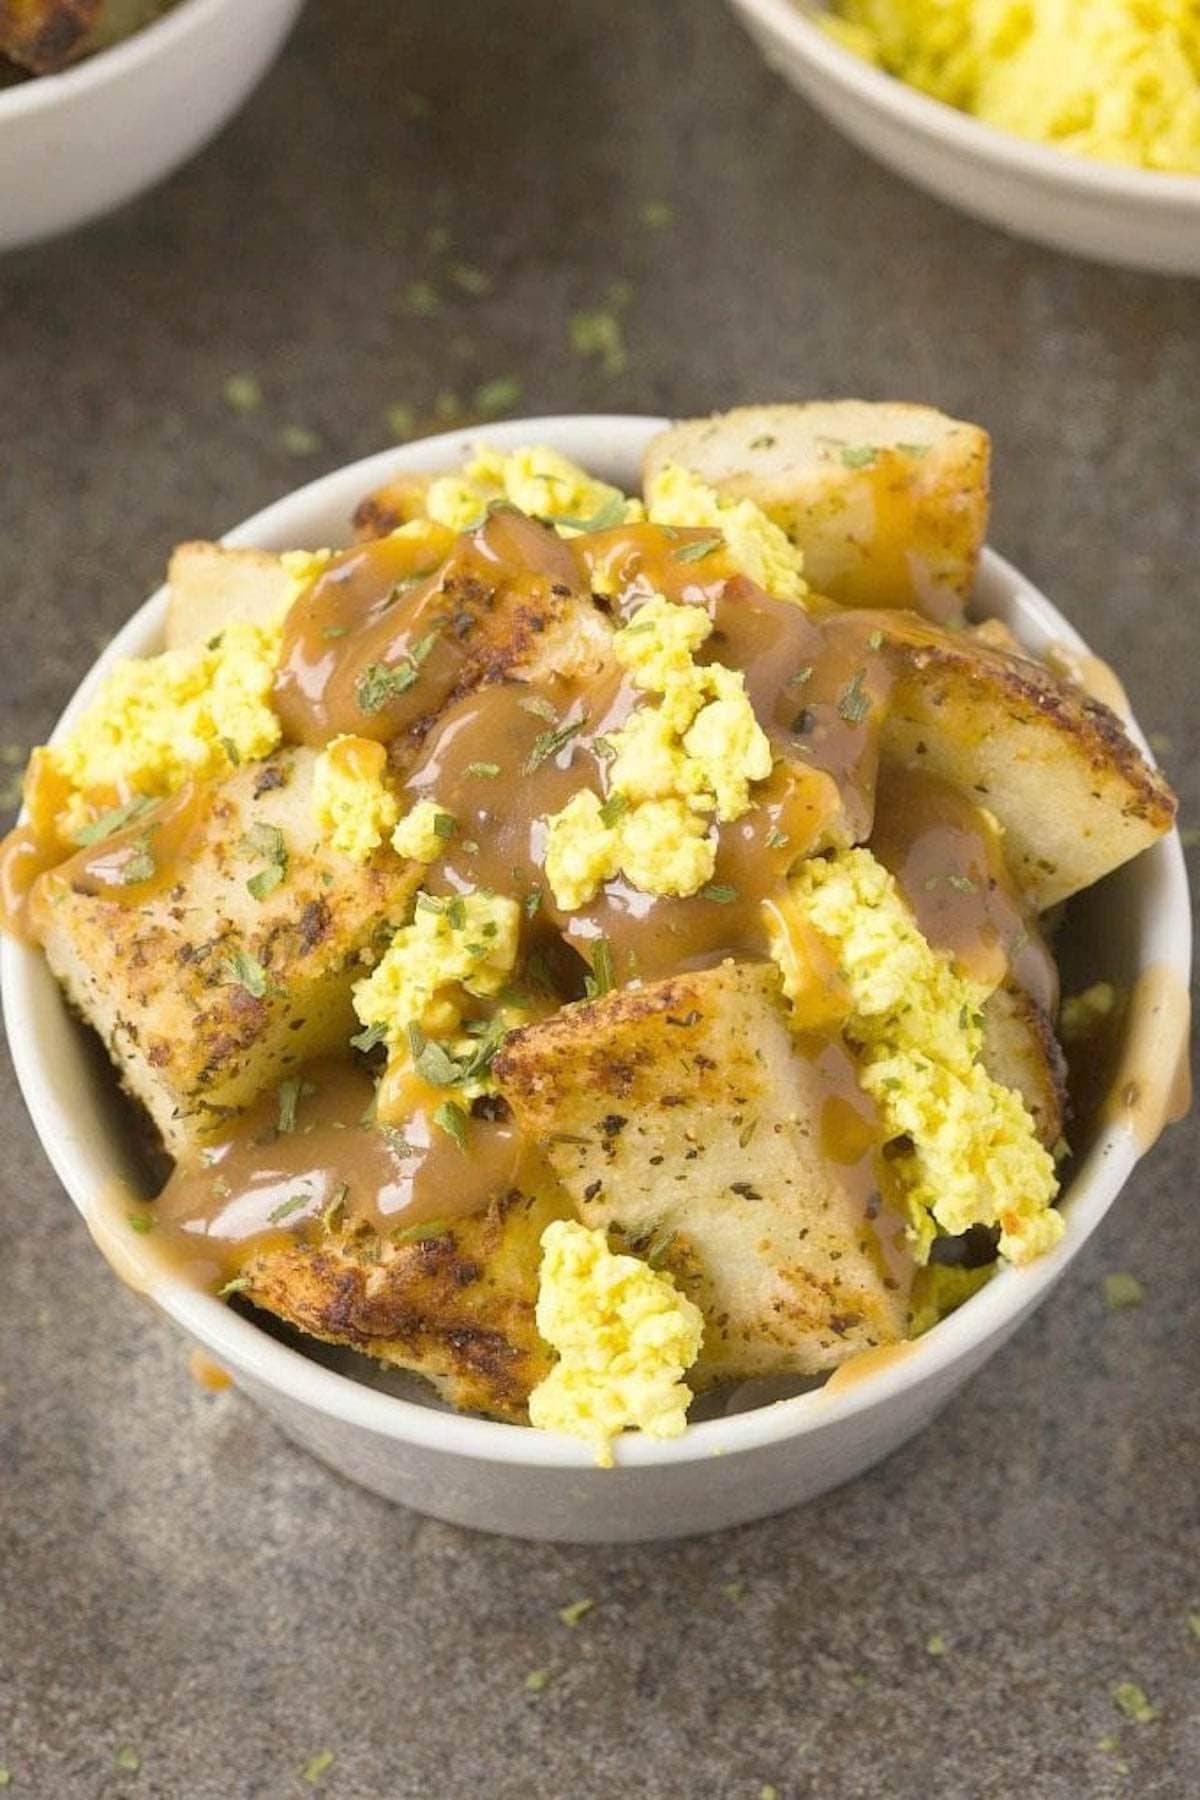 roasted potatoes with crumbled tofu 'curds' and gravy.